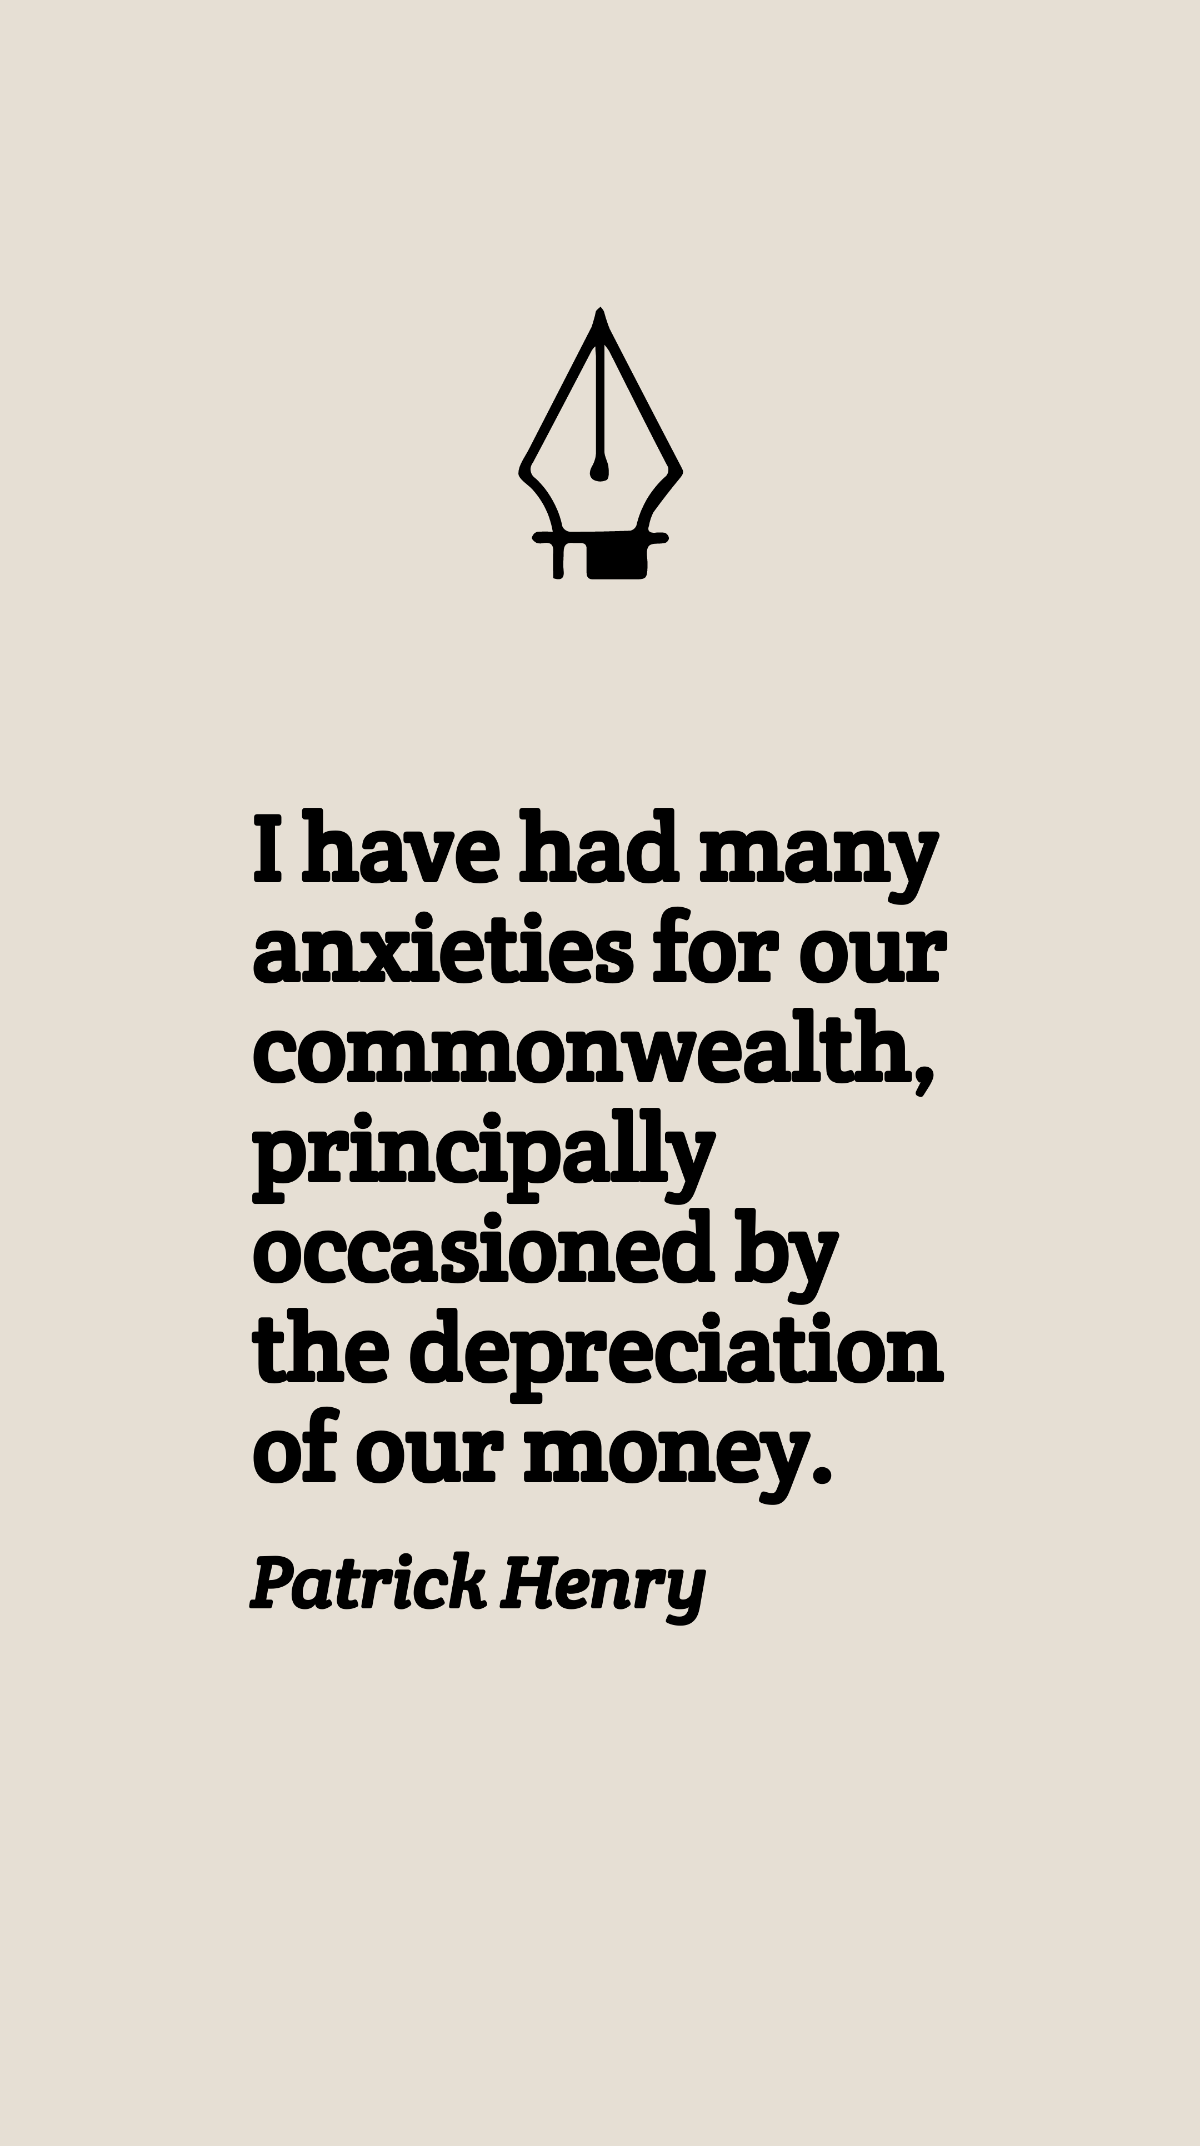 Patrick Henry - I have had many anxieties for our commonwealth, principally occasioned by the depreciation of our money.